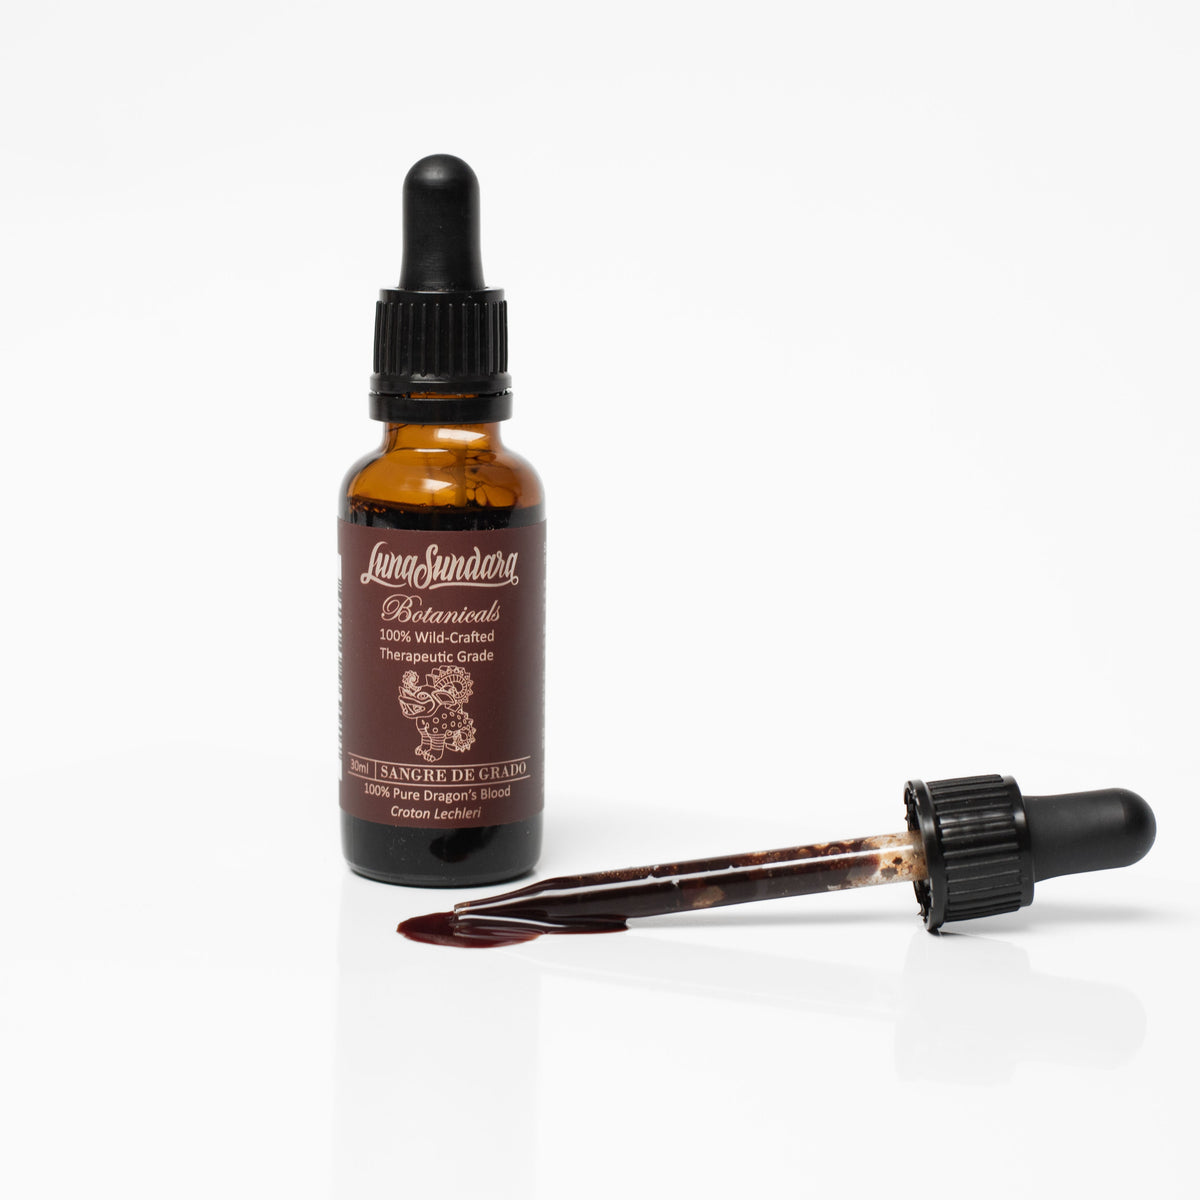 All Natural Dragon’s Blood Essential Oil